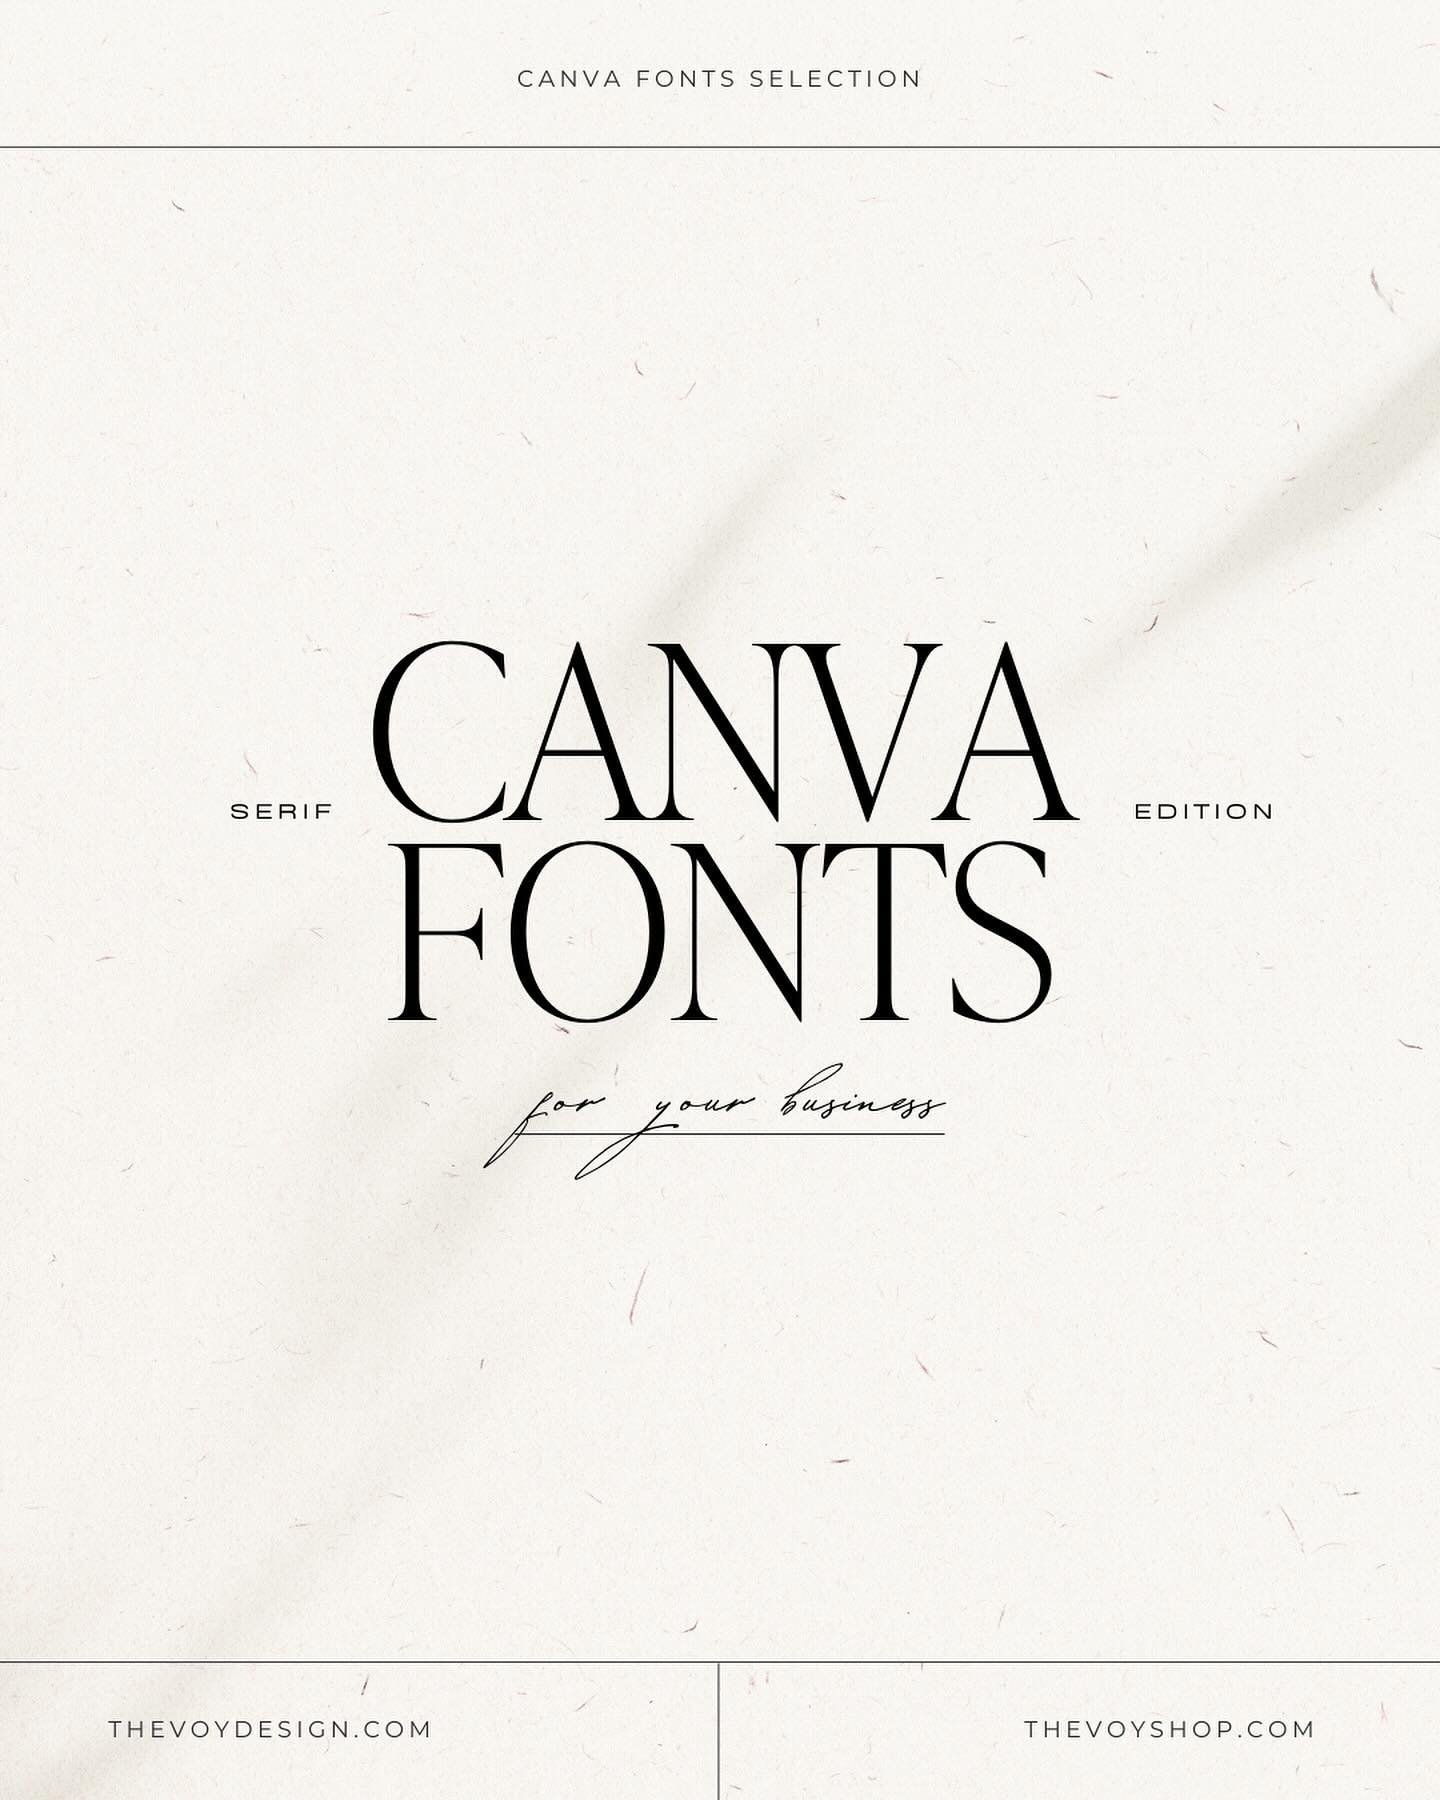 I&rsquo;m sharing with you a selection of these 7 beautiful, high-quality Canva fonts in seri 😍✨

Do you like the selection? 
Which of these do you like the most? 1/2/3/4/5/6/7?🥰

#canva #canvatemplates #canvafonts #fonts #graphicdesign #branddesig